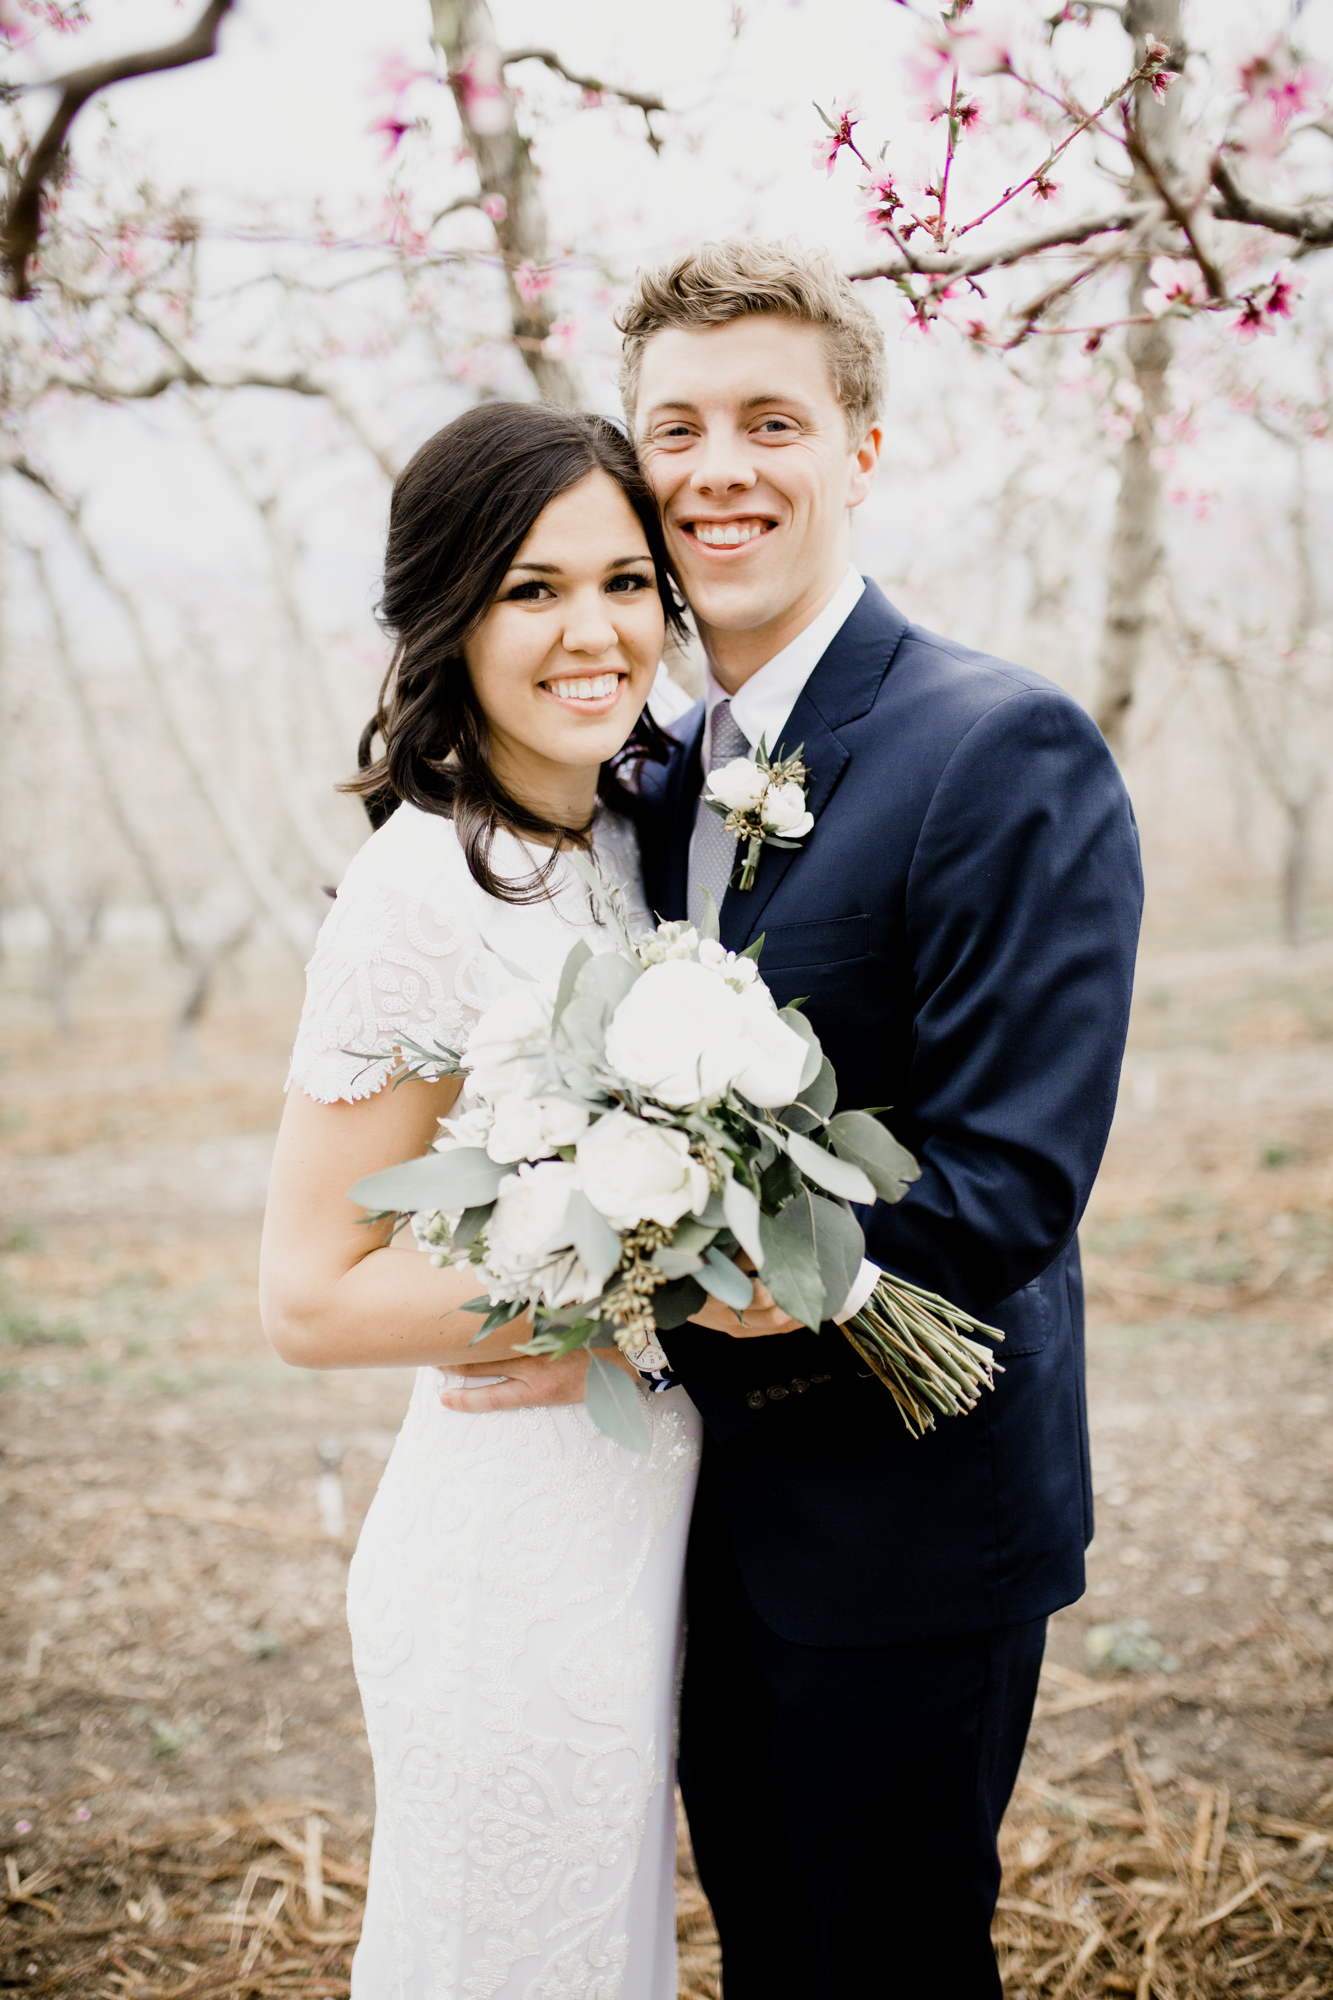 MADIE & MORLEY | UTAH SPRING ORCHARD FORMALS | THE VISIONARY CO